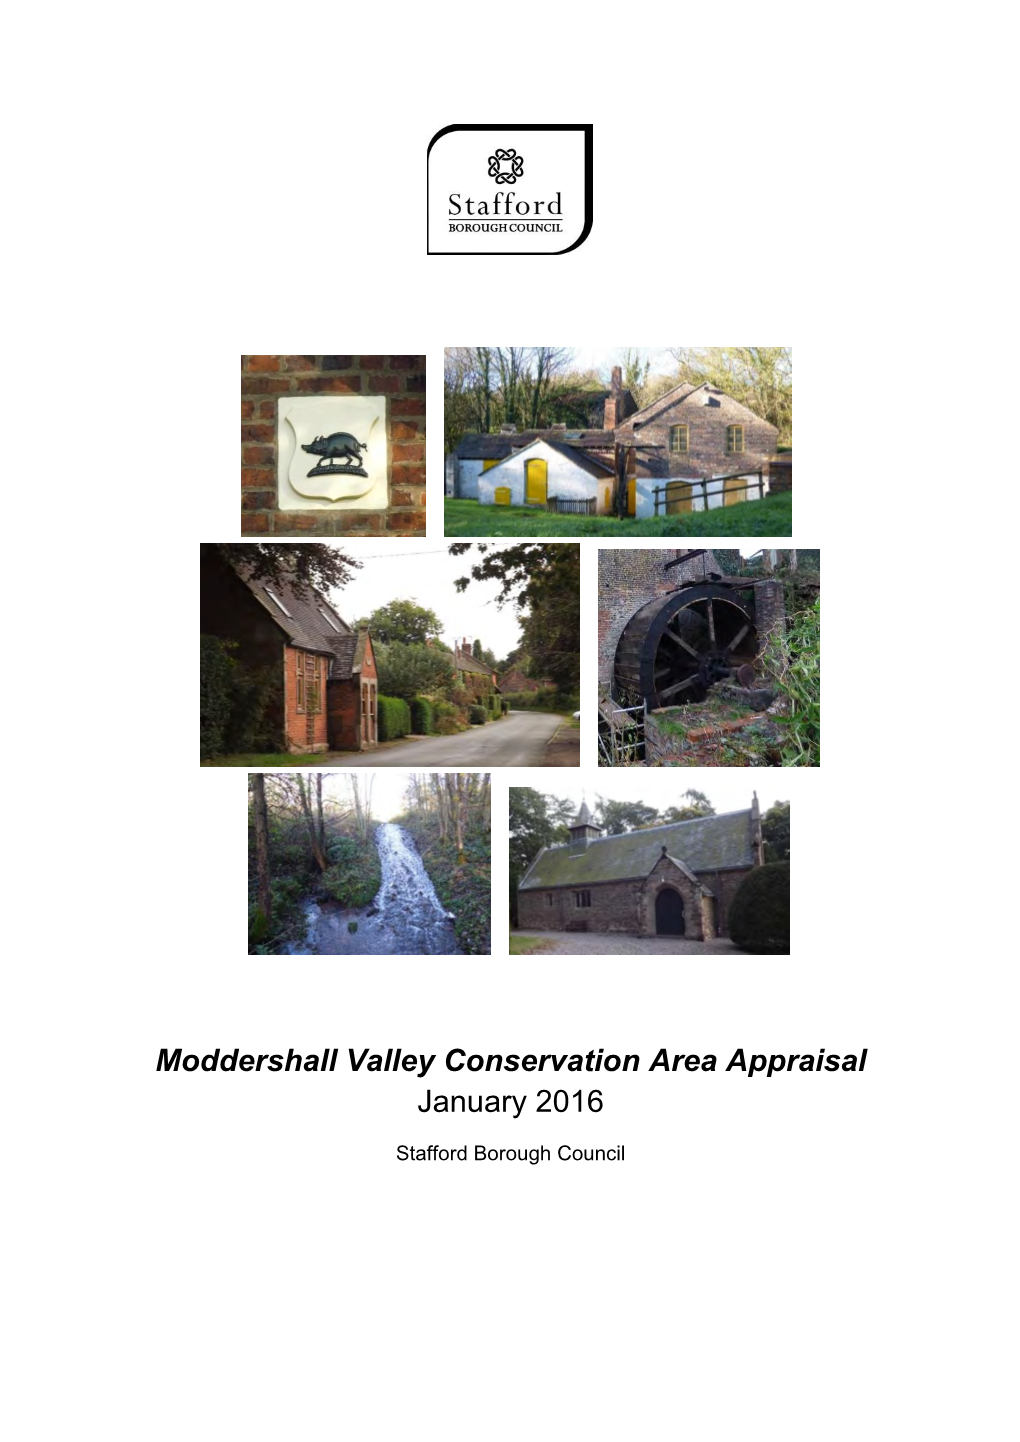 Moddershall Valley Conservation Area Appraisal January 2016